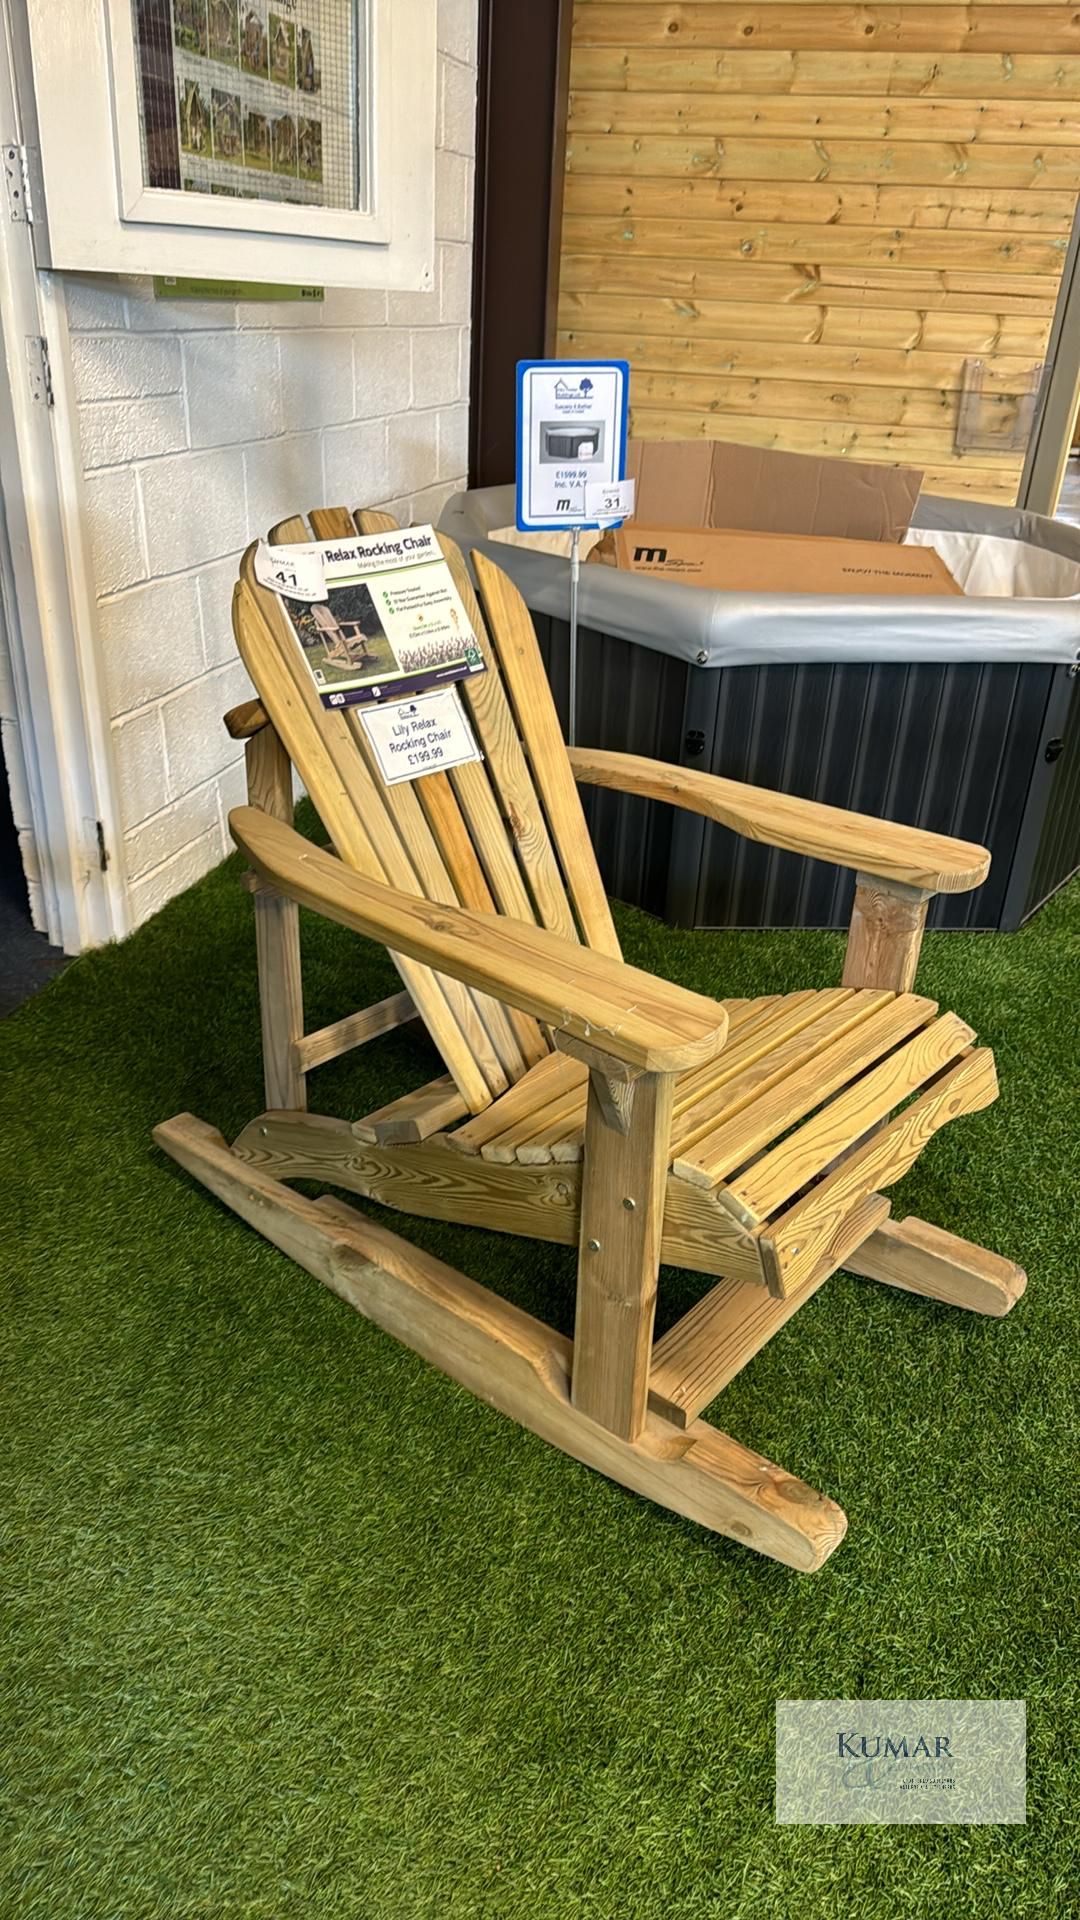 Lily Relax Rocking Chair, Sizes (W x D x H) 0.72m x 1.14m x 0.99m RRP £199.99 - Image 2 of 7